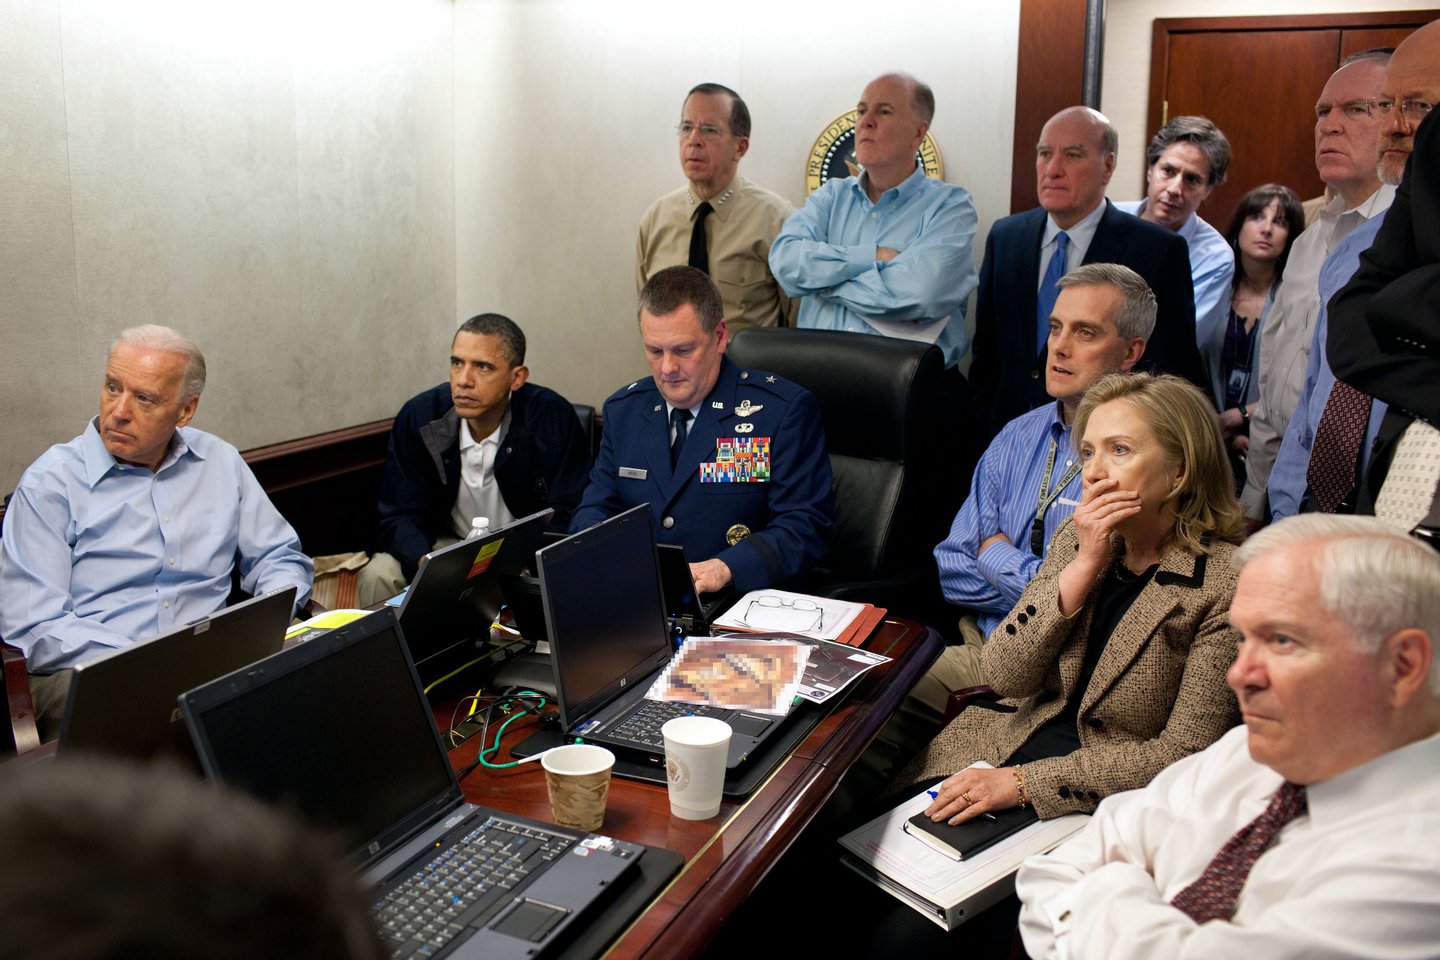 WASHINGTON, DC - MAY 1: (EDITORS NOTE: Please be advised that a classified document visible in this photo was obscured by The White House) In this handout image provided by The White House, President Barack Obama, Vice President Joe Biden, Secretary of State Hillary Clinton and members of the national security team receive an update on the mission against Osama bin Laden in the Situation Room of the White House May 1, 2011 in Washington, DC. Obama later announced that the United States had killed Bin Laden in an operation led by U.S. Special Forces at a compound in Abbottabad, Pakistan. (Photo by Pete Souza/The White House via Getty Images)